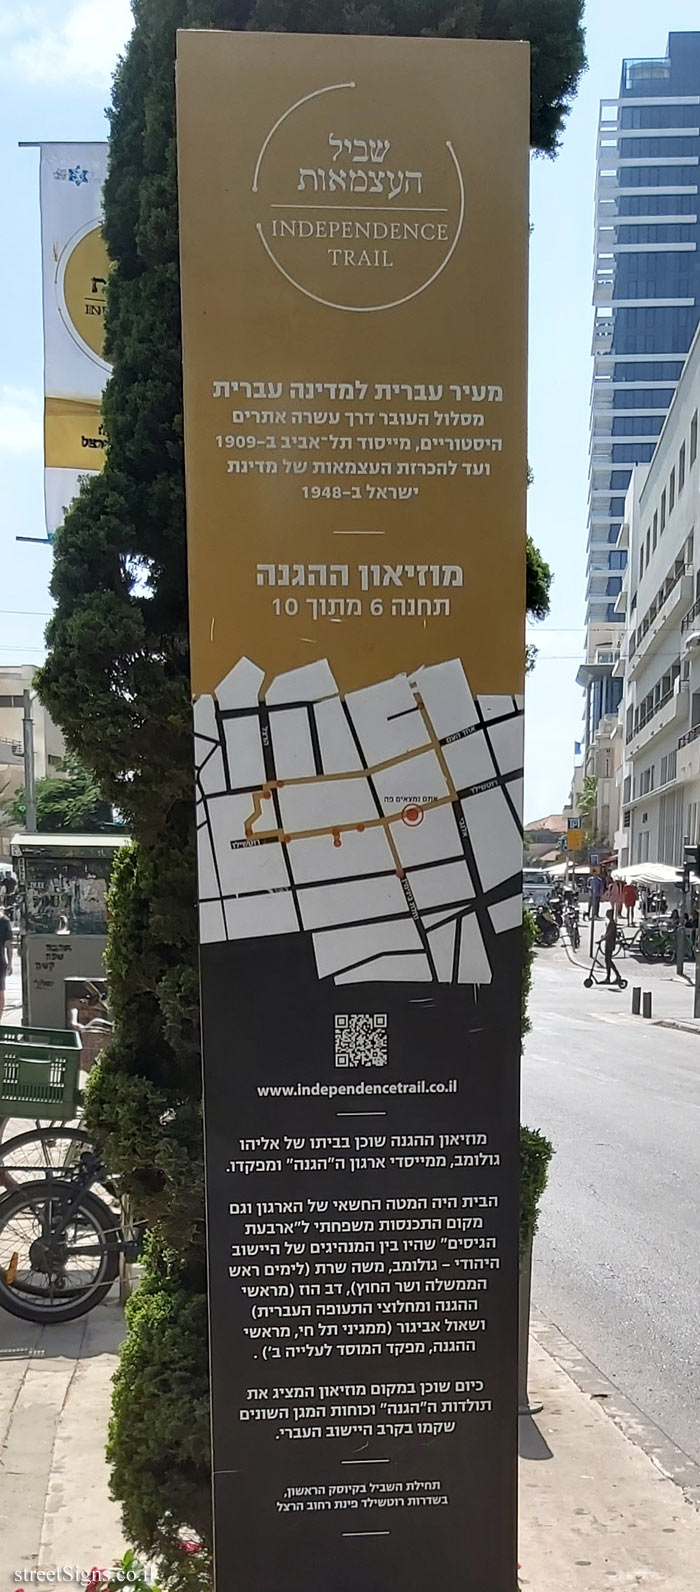 Tel Aviv - Independence Trail - The Haganah Museum - Information